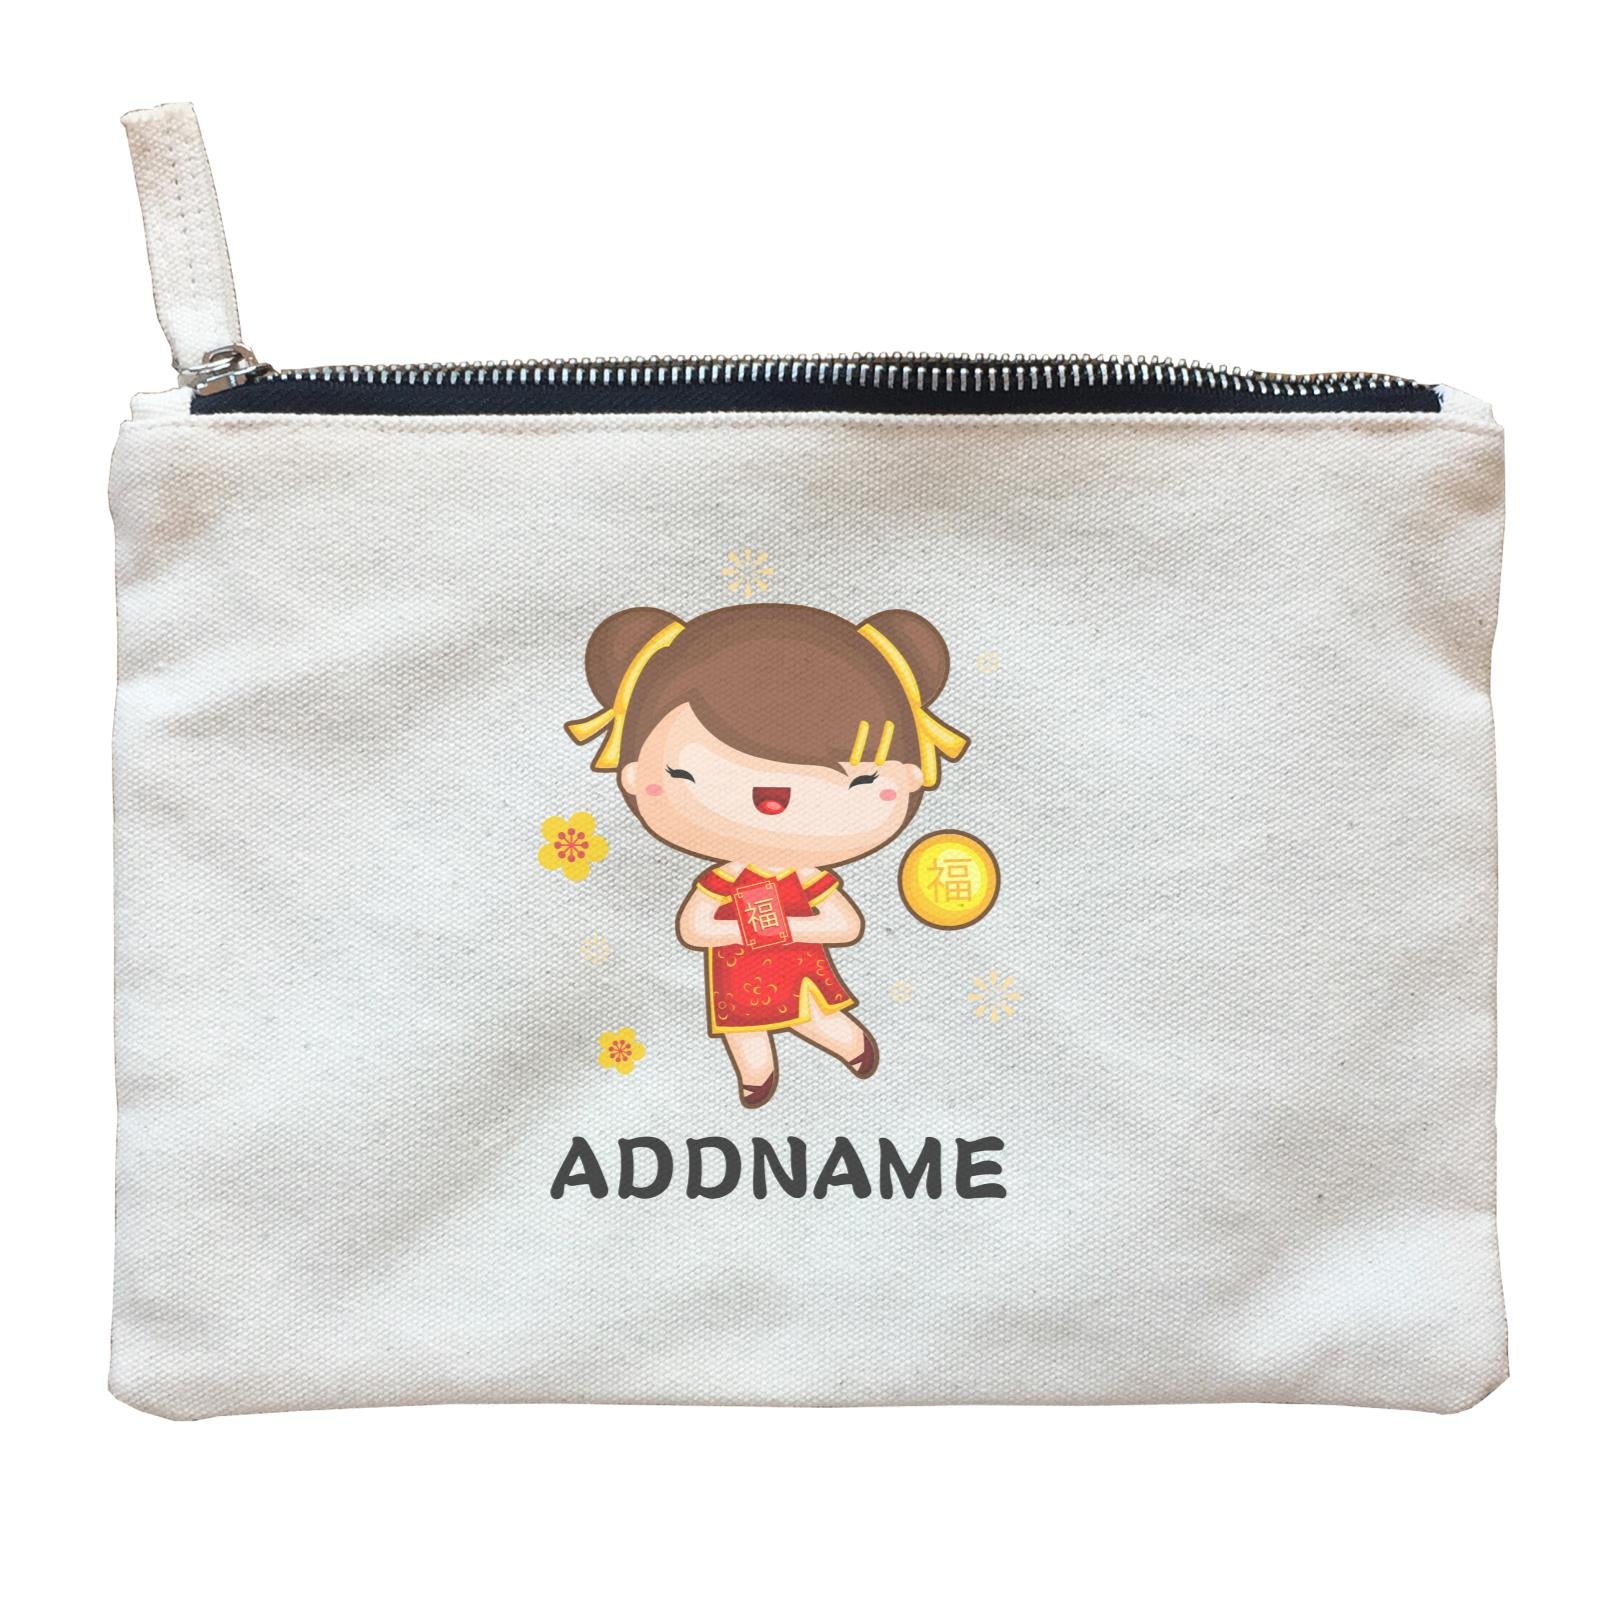 Cute CNY Girl with Red Packet and Happiness Symbol Zipper Pouch